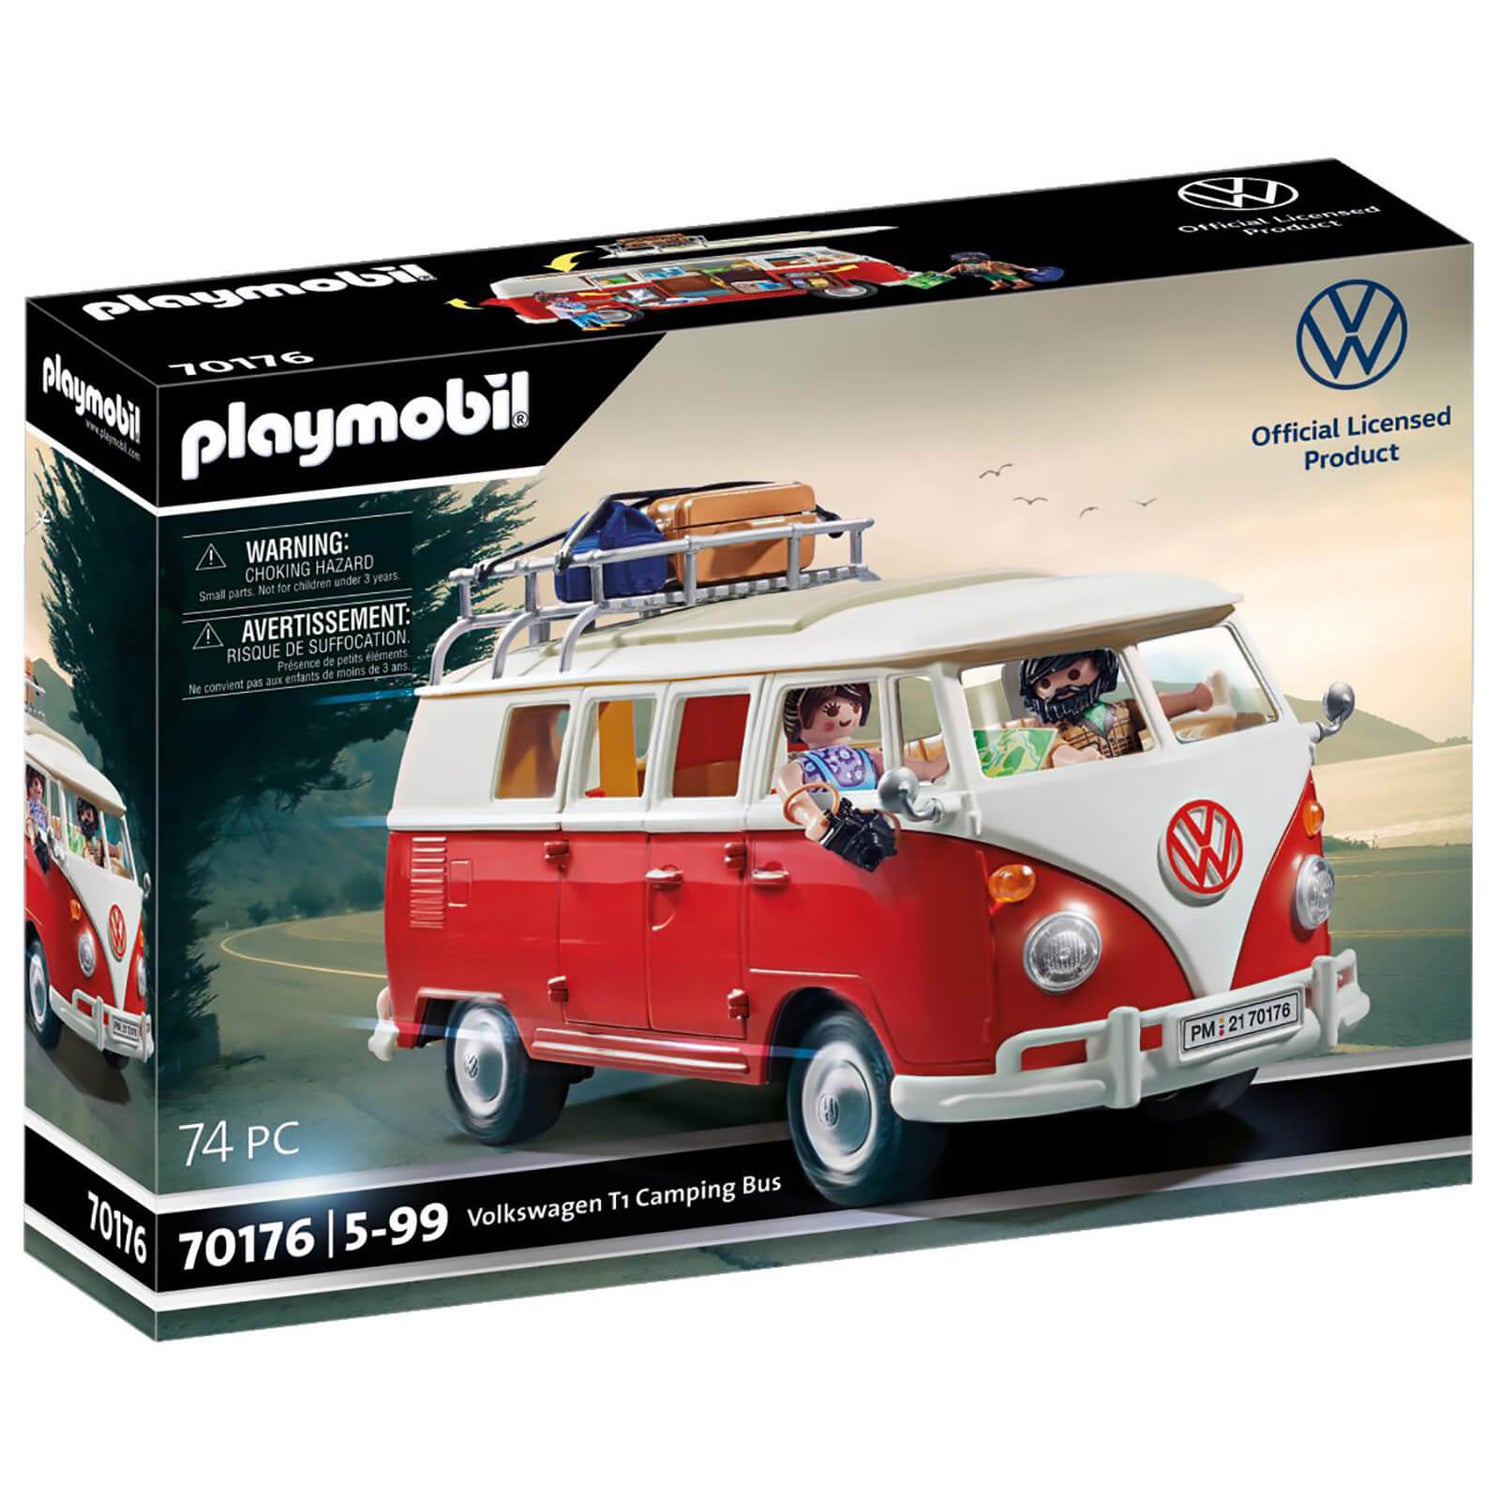 Playmobil 70176 Volkswagen T1 Camping Bus Official Licensed Product Neu & Ovp 